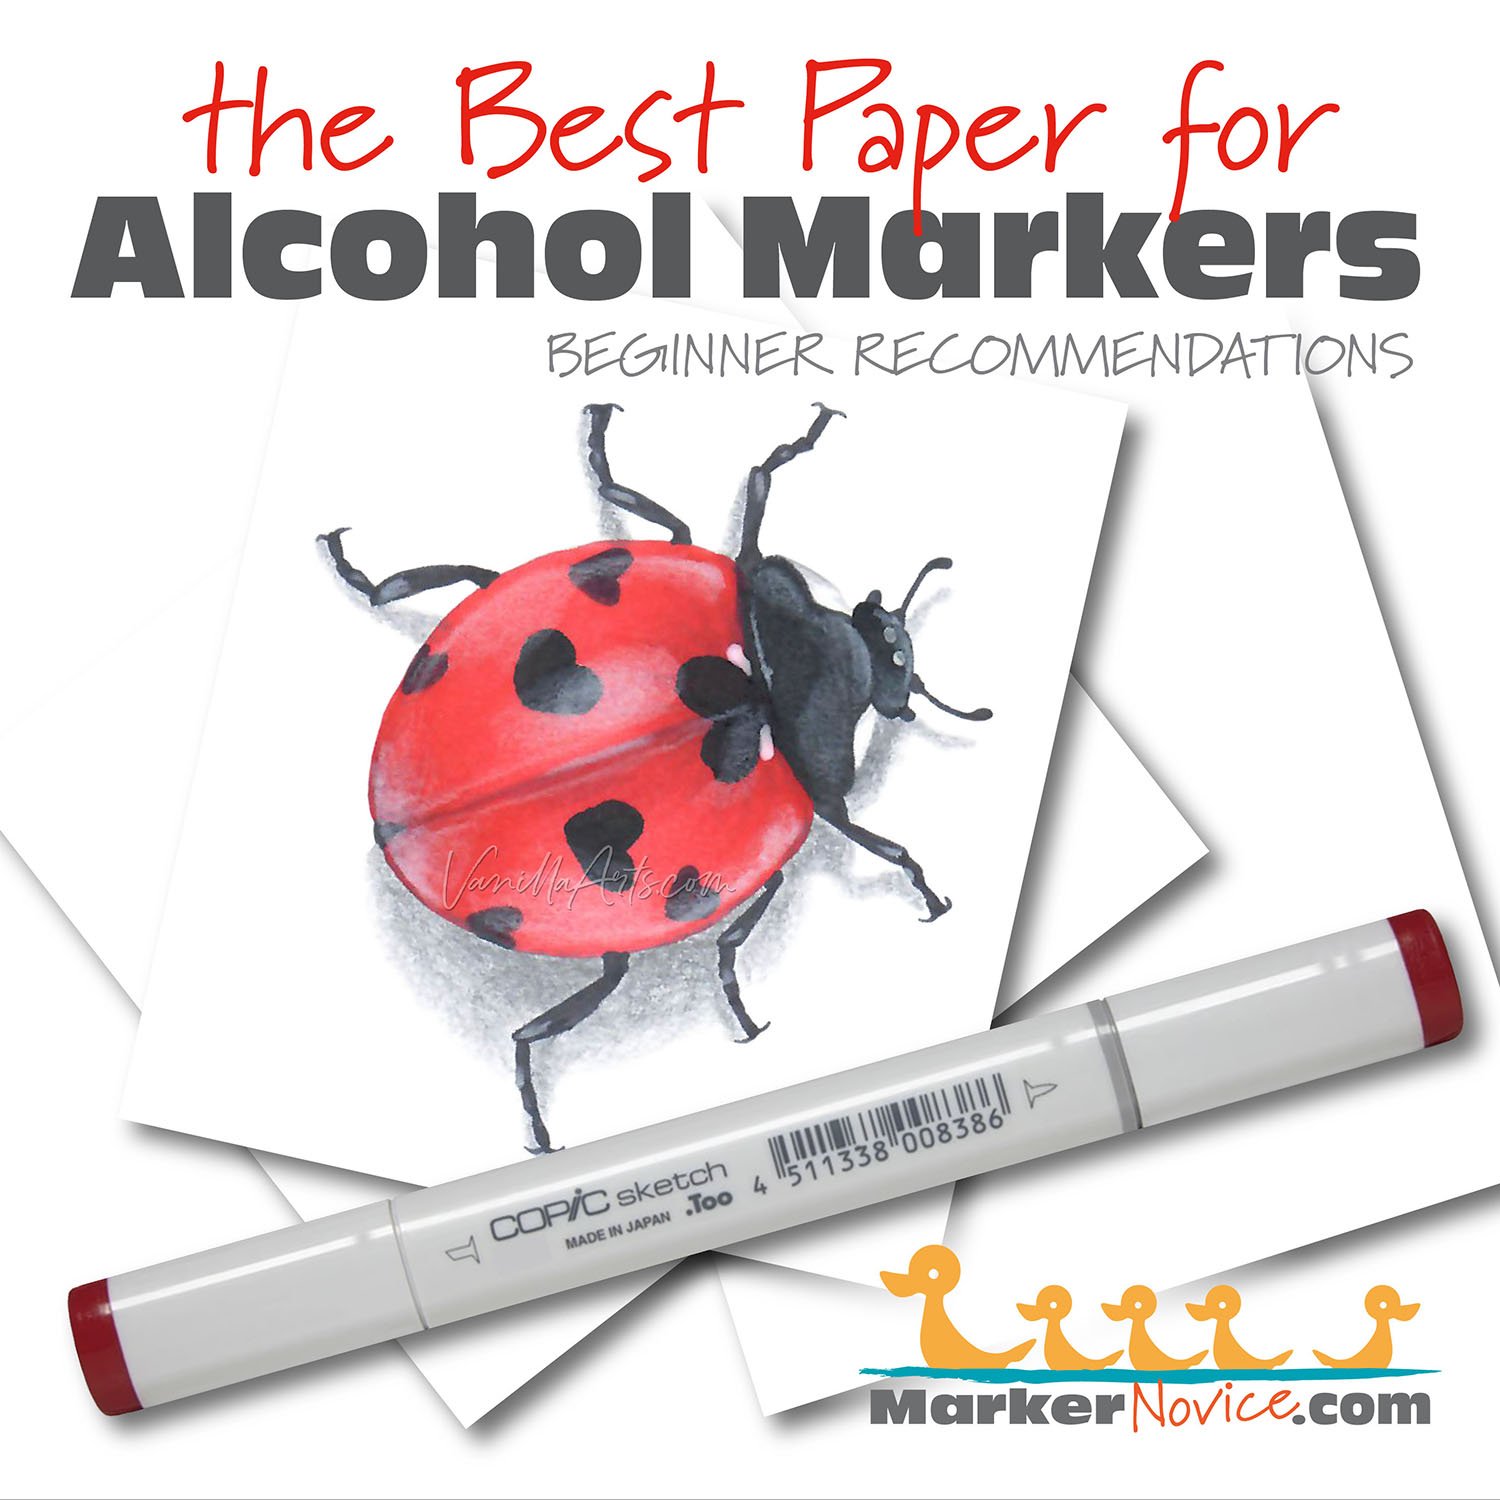 Ohuhu: Best paper for Alcohol Markers